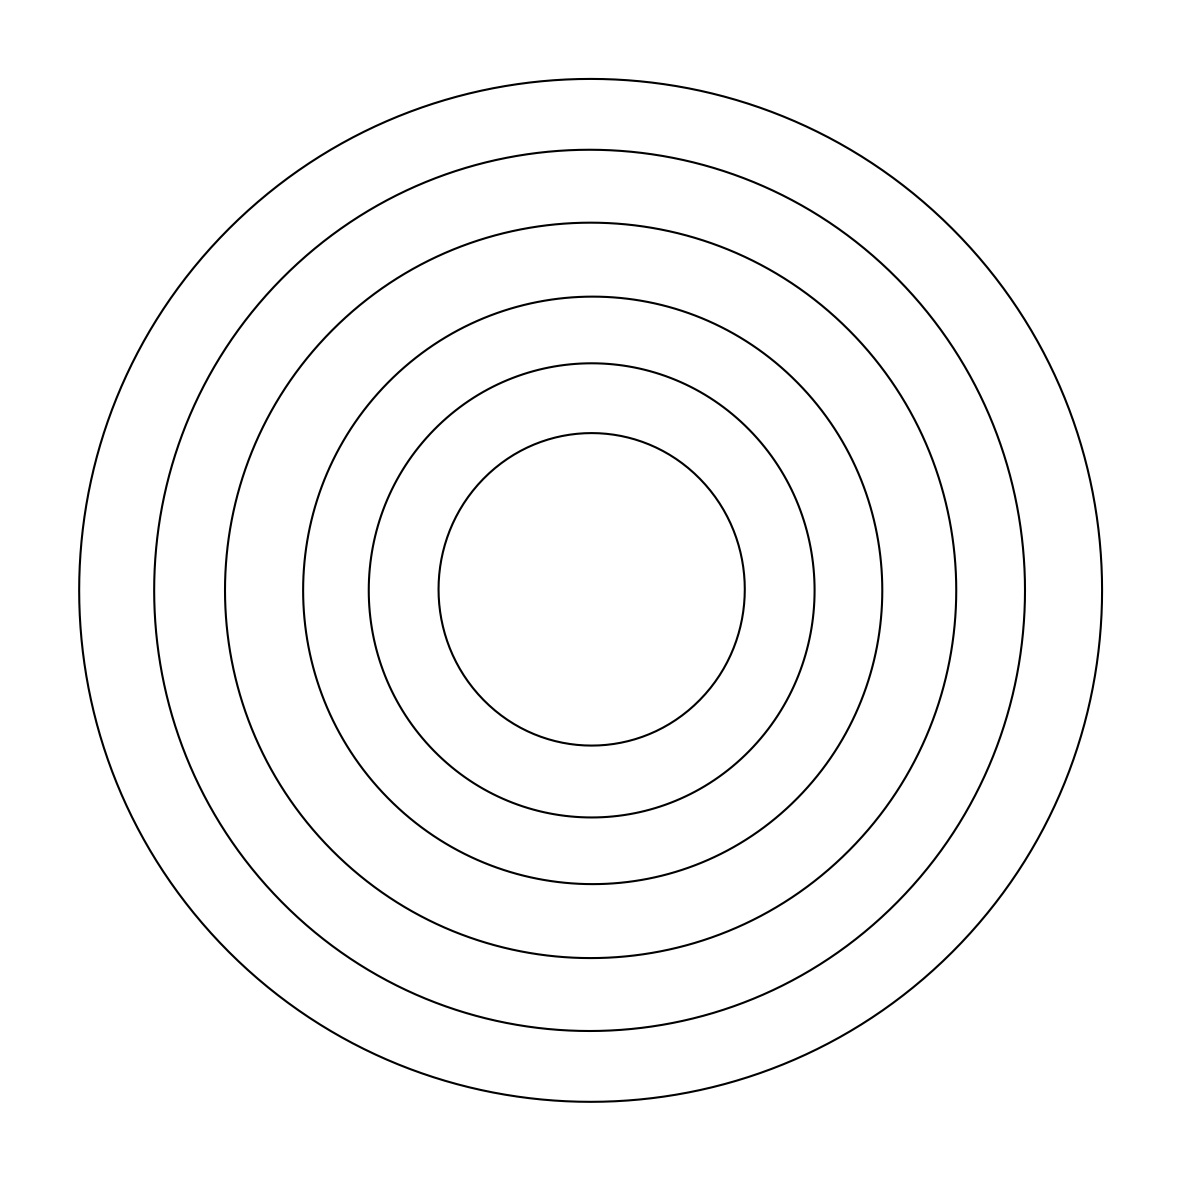 Free Printable Concentric Circles Template